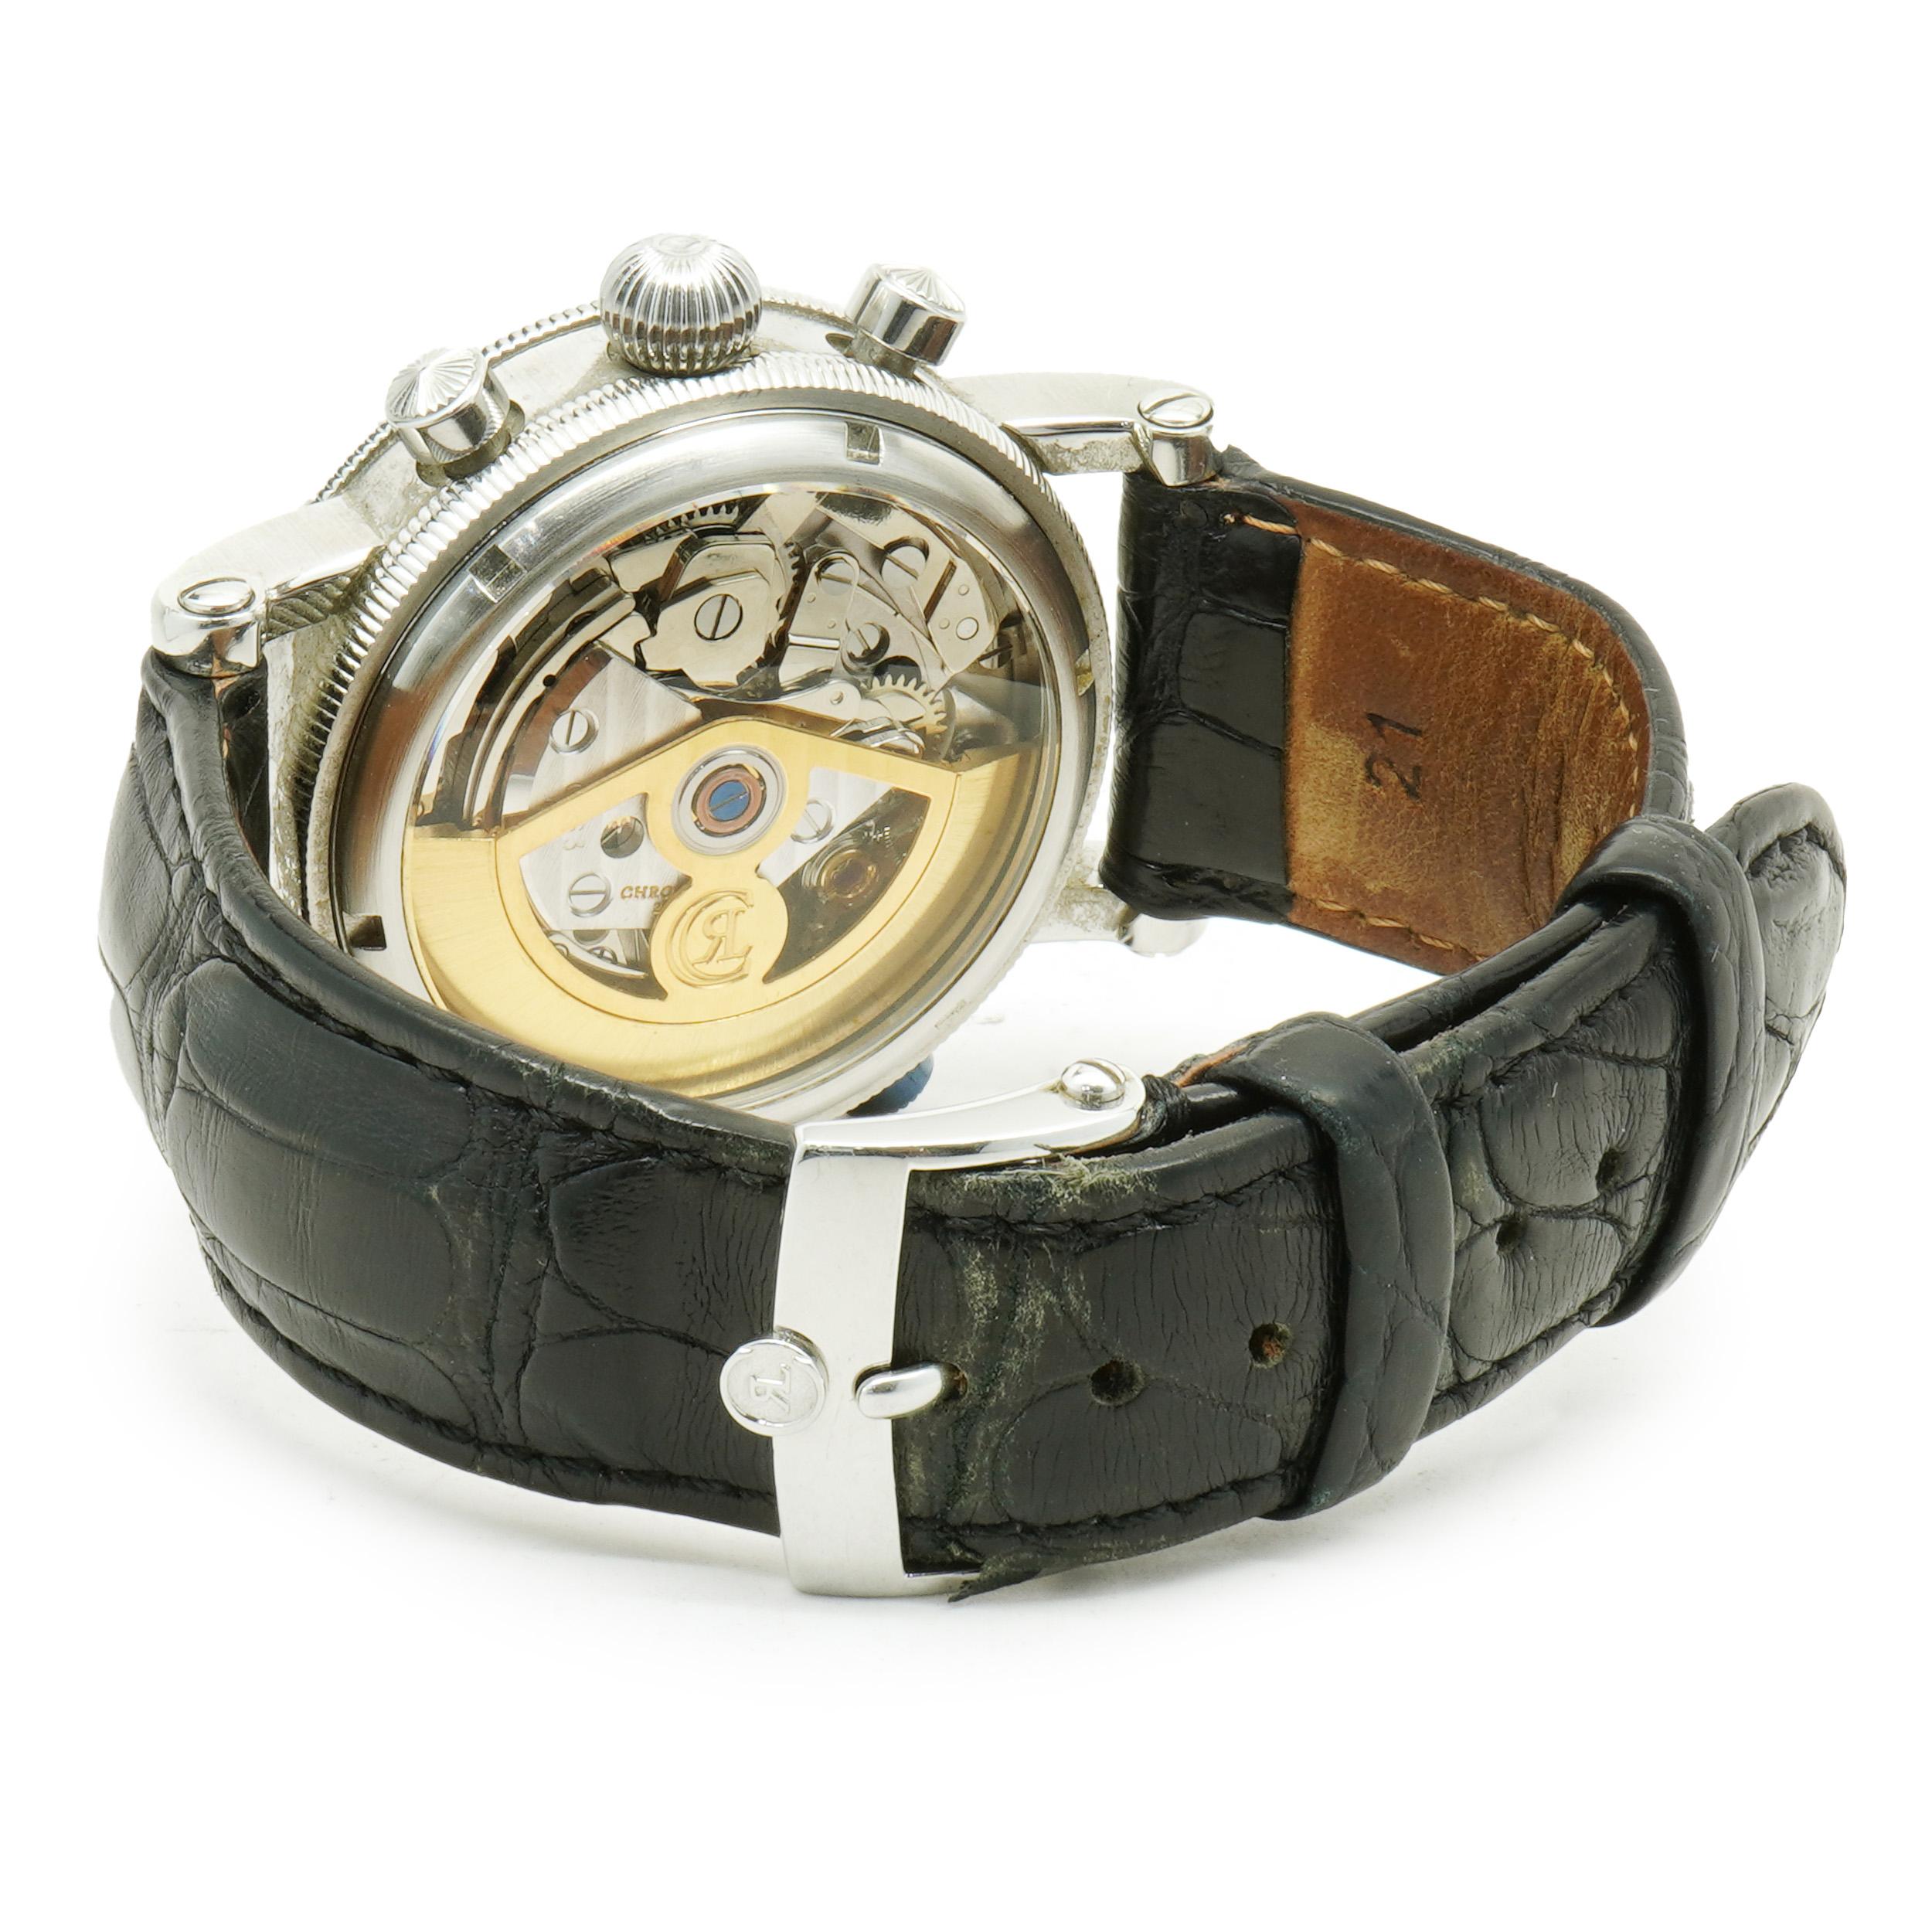 Chronoswiss Stainless Steel Tora In Excellent Condition For Sale In Scottsdale, AZ